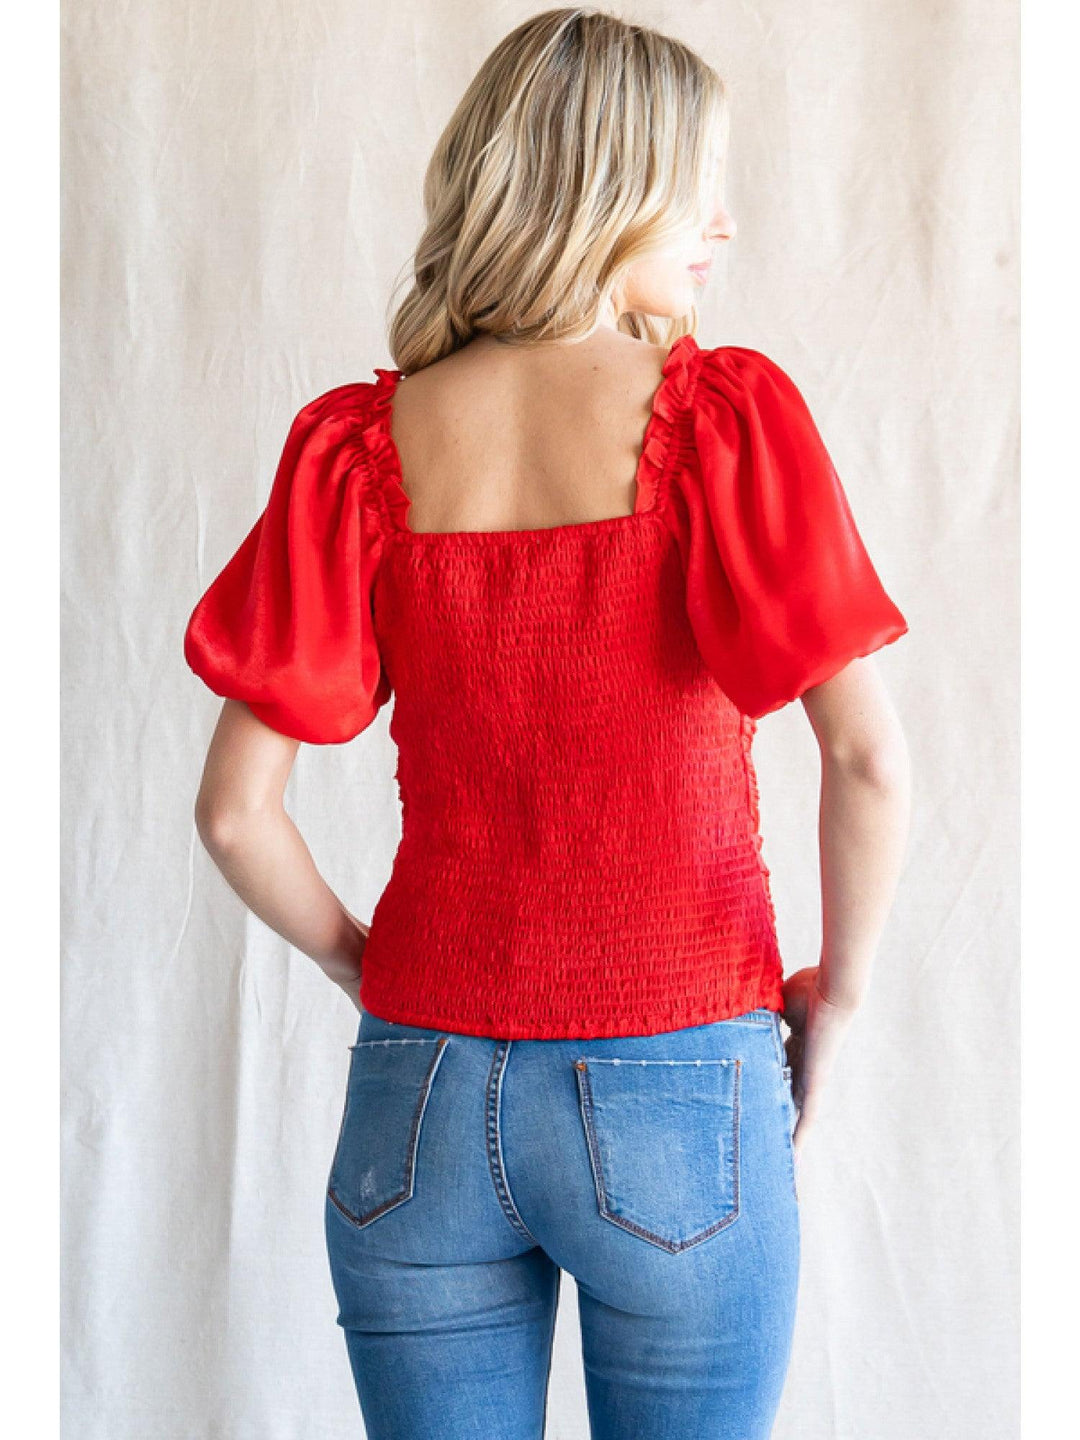 Solid red top with chest ruched, back smocked, frilled shoulder and short puffed sleeves jodifl